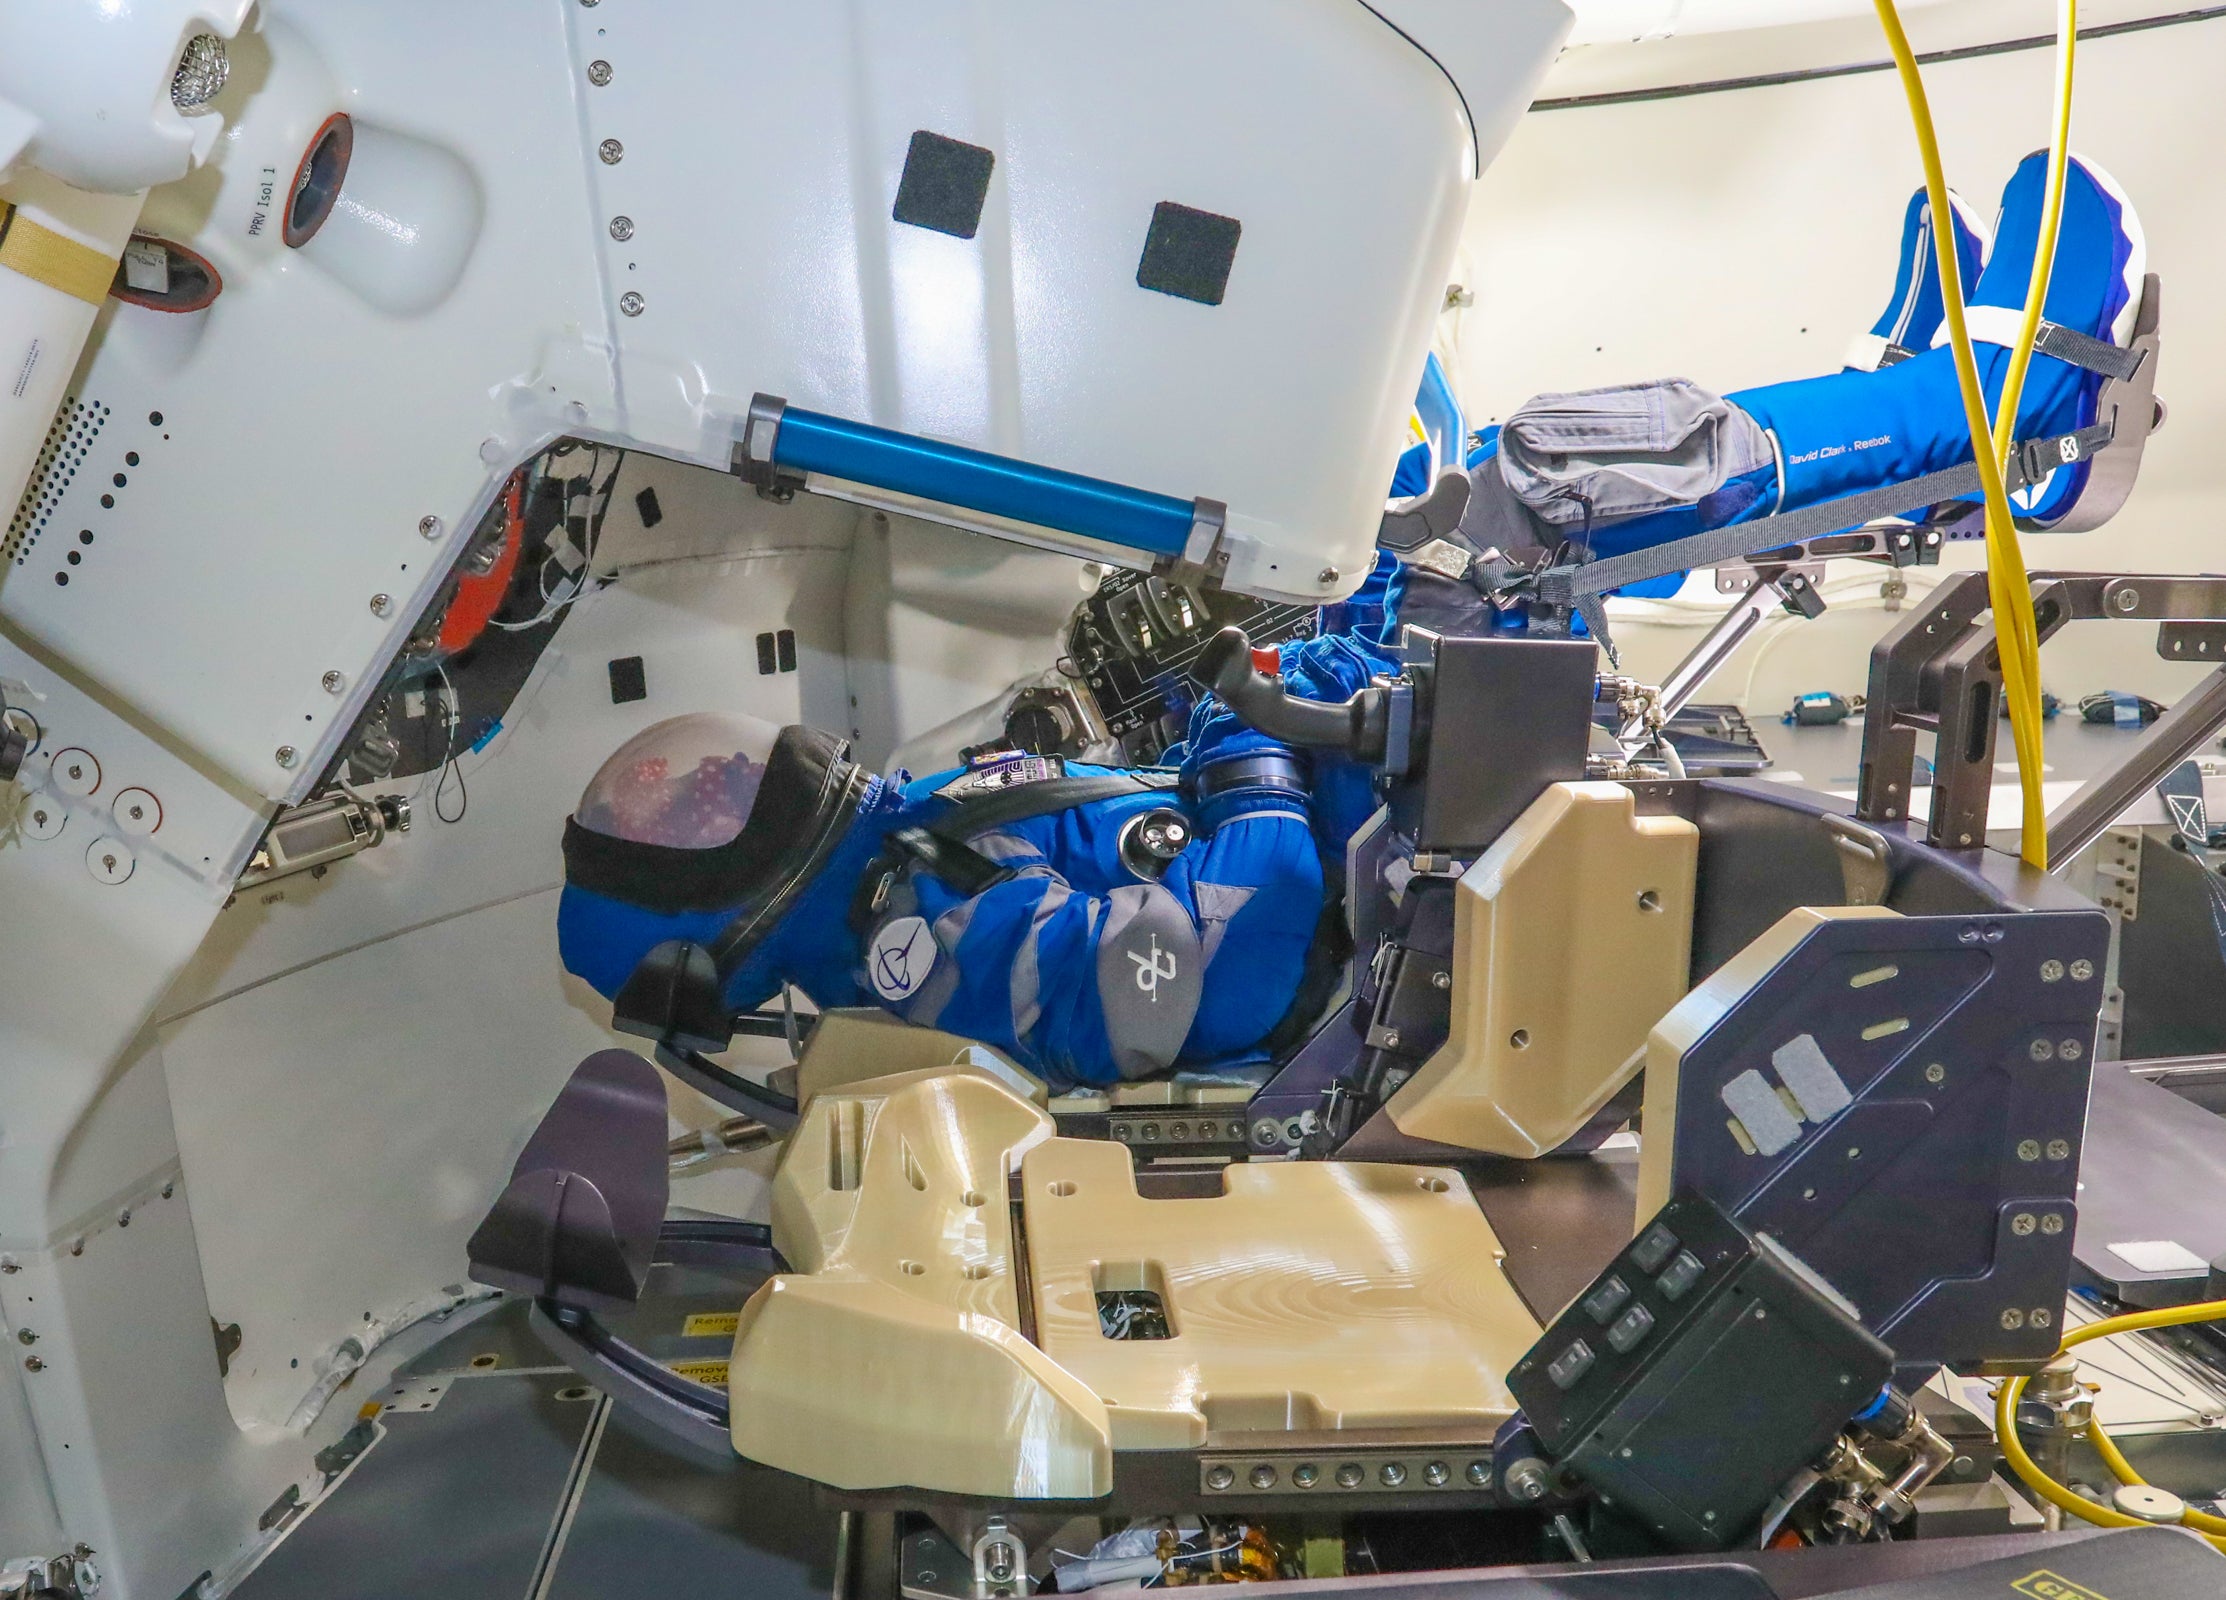 Rosie the Rocketeer, a anthropometric test device, strapped to the commander's seat inside the CST-100 Starliner spacecraft.  (Image: Boeing)